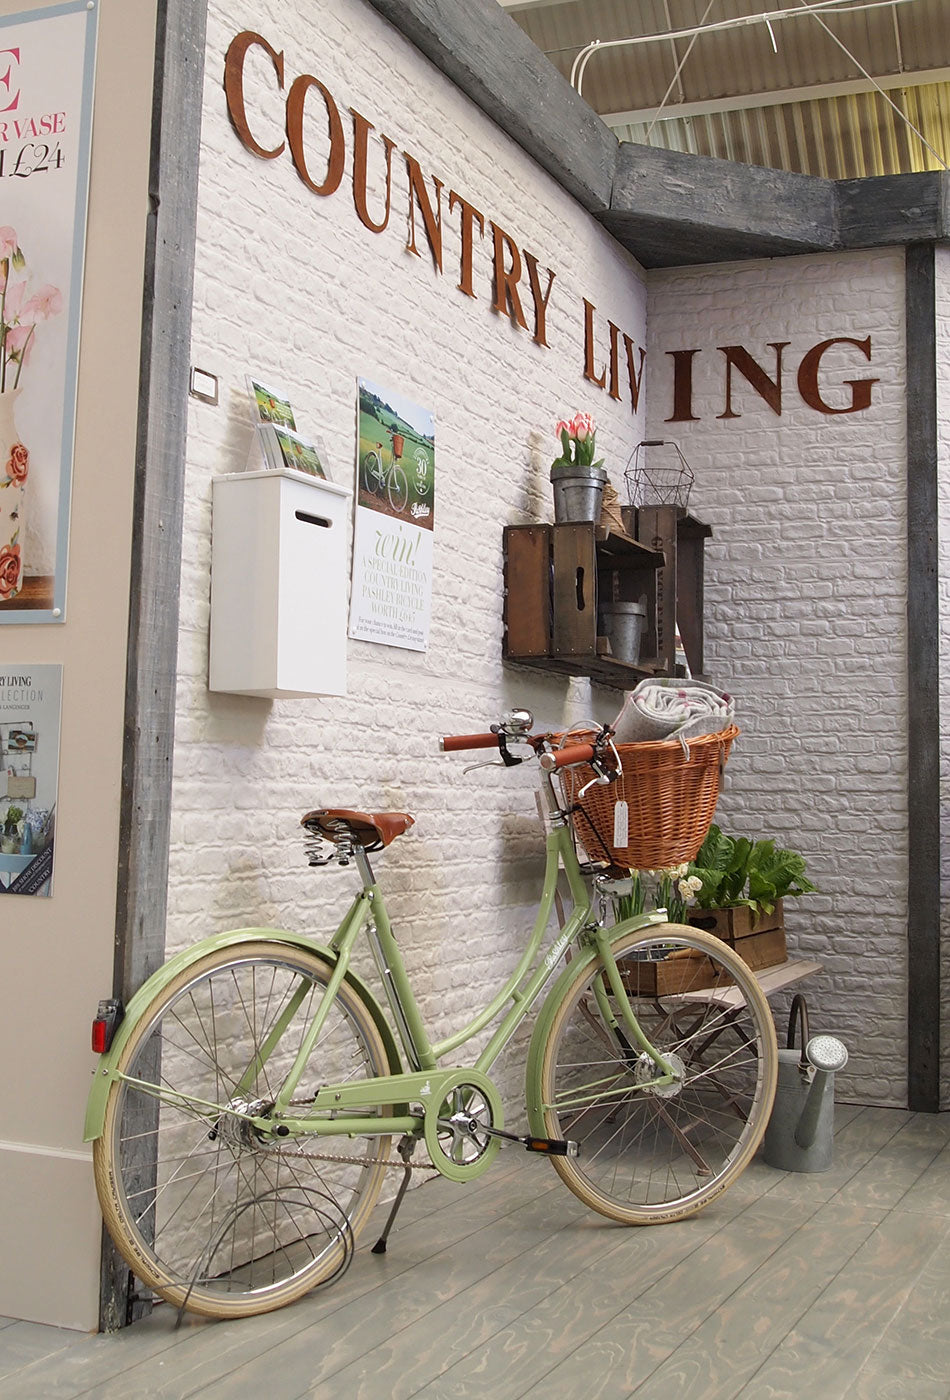 The Country Living Special Edition meadow green Pashley Bike with wicker basket, on display at the 2015 CL fair in Earl's Court.